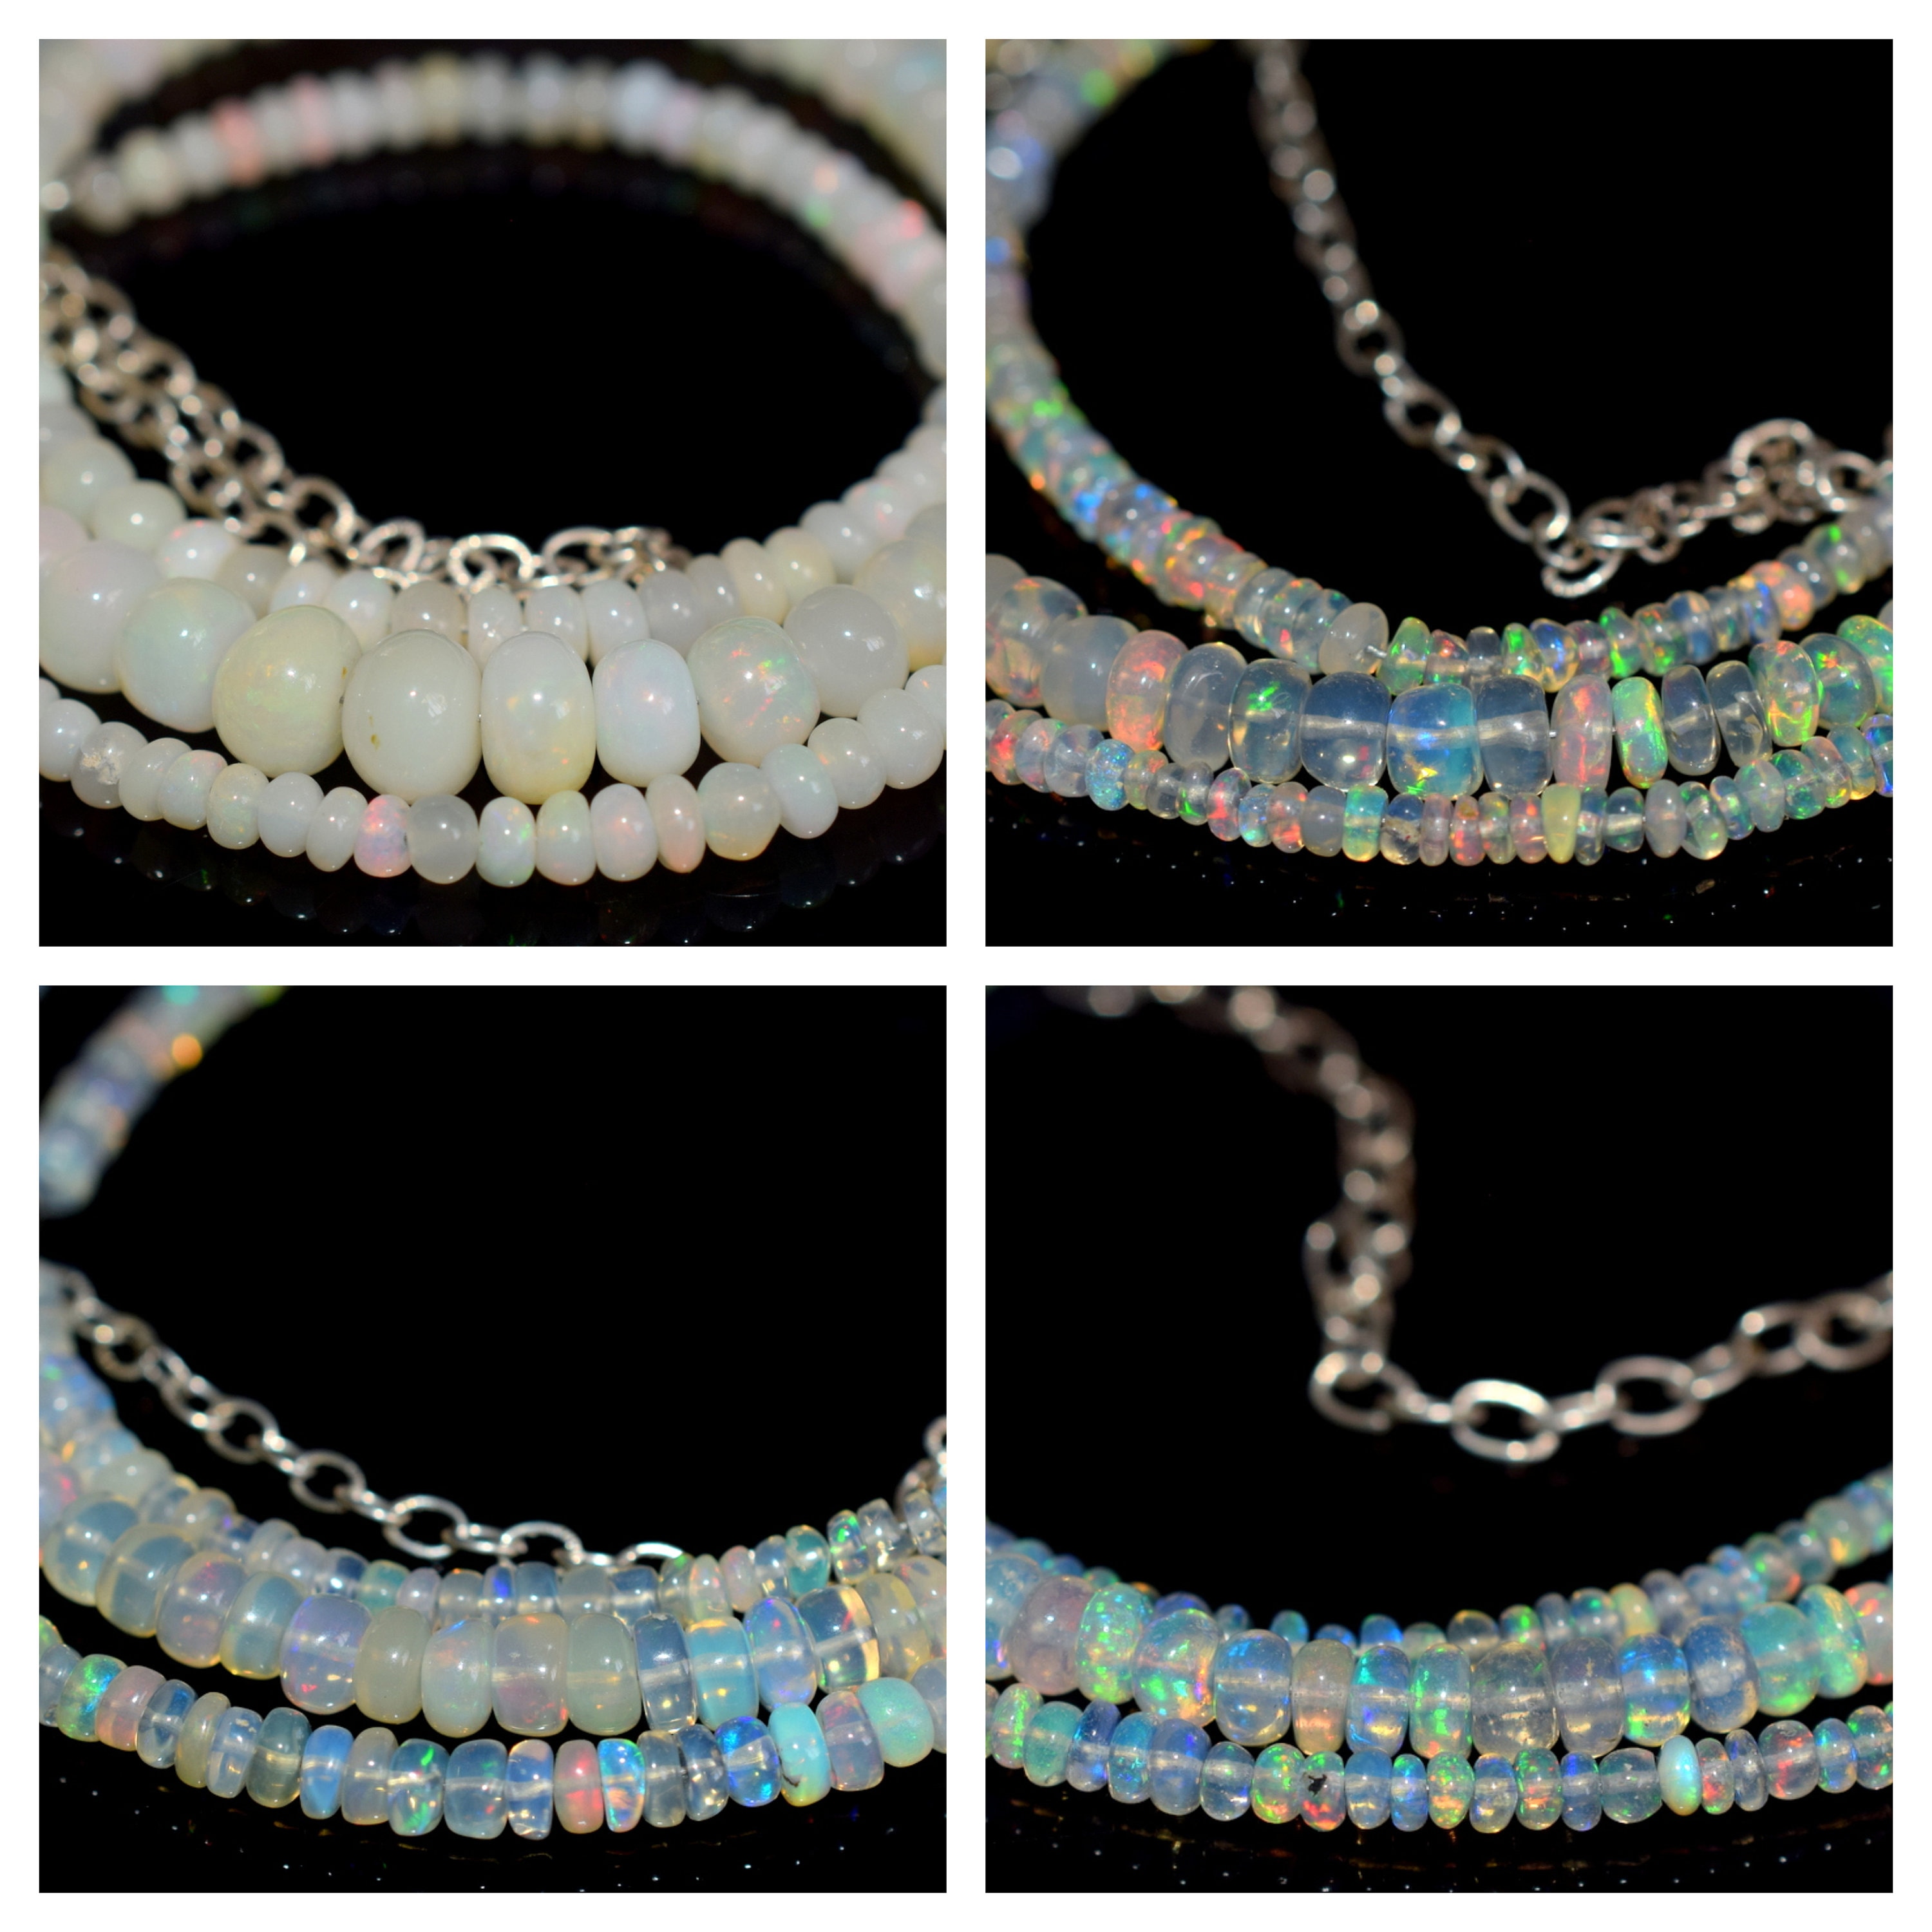 Details about   100% Natural Multi Ethiopian Opal Gemstone Beads Beautiful Necklace 16" KG-1103